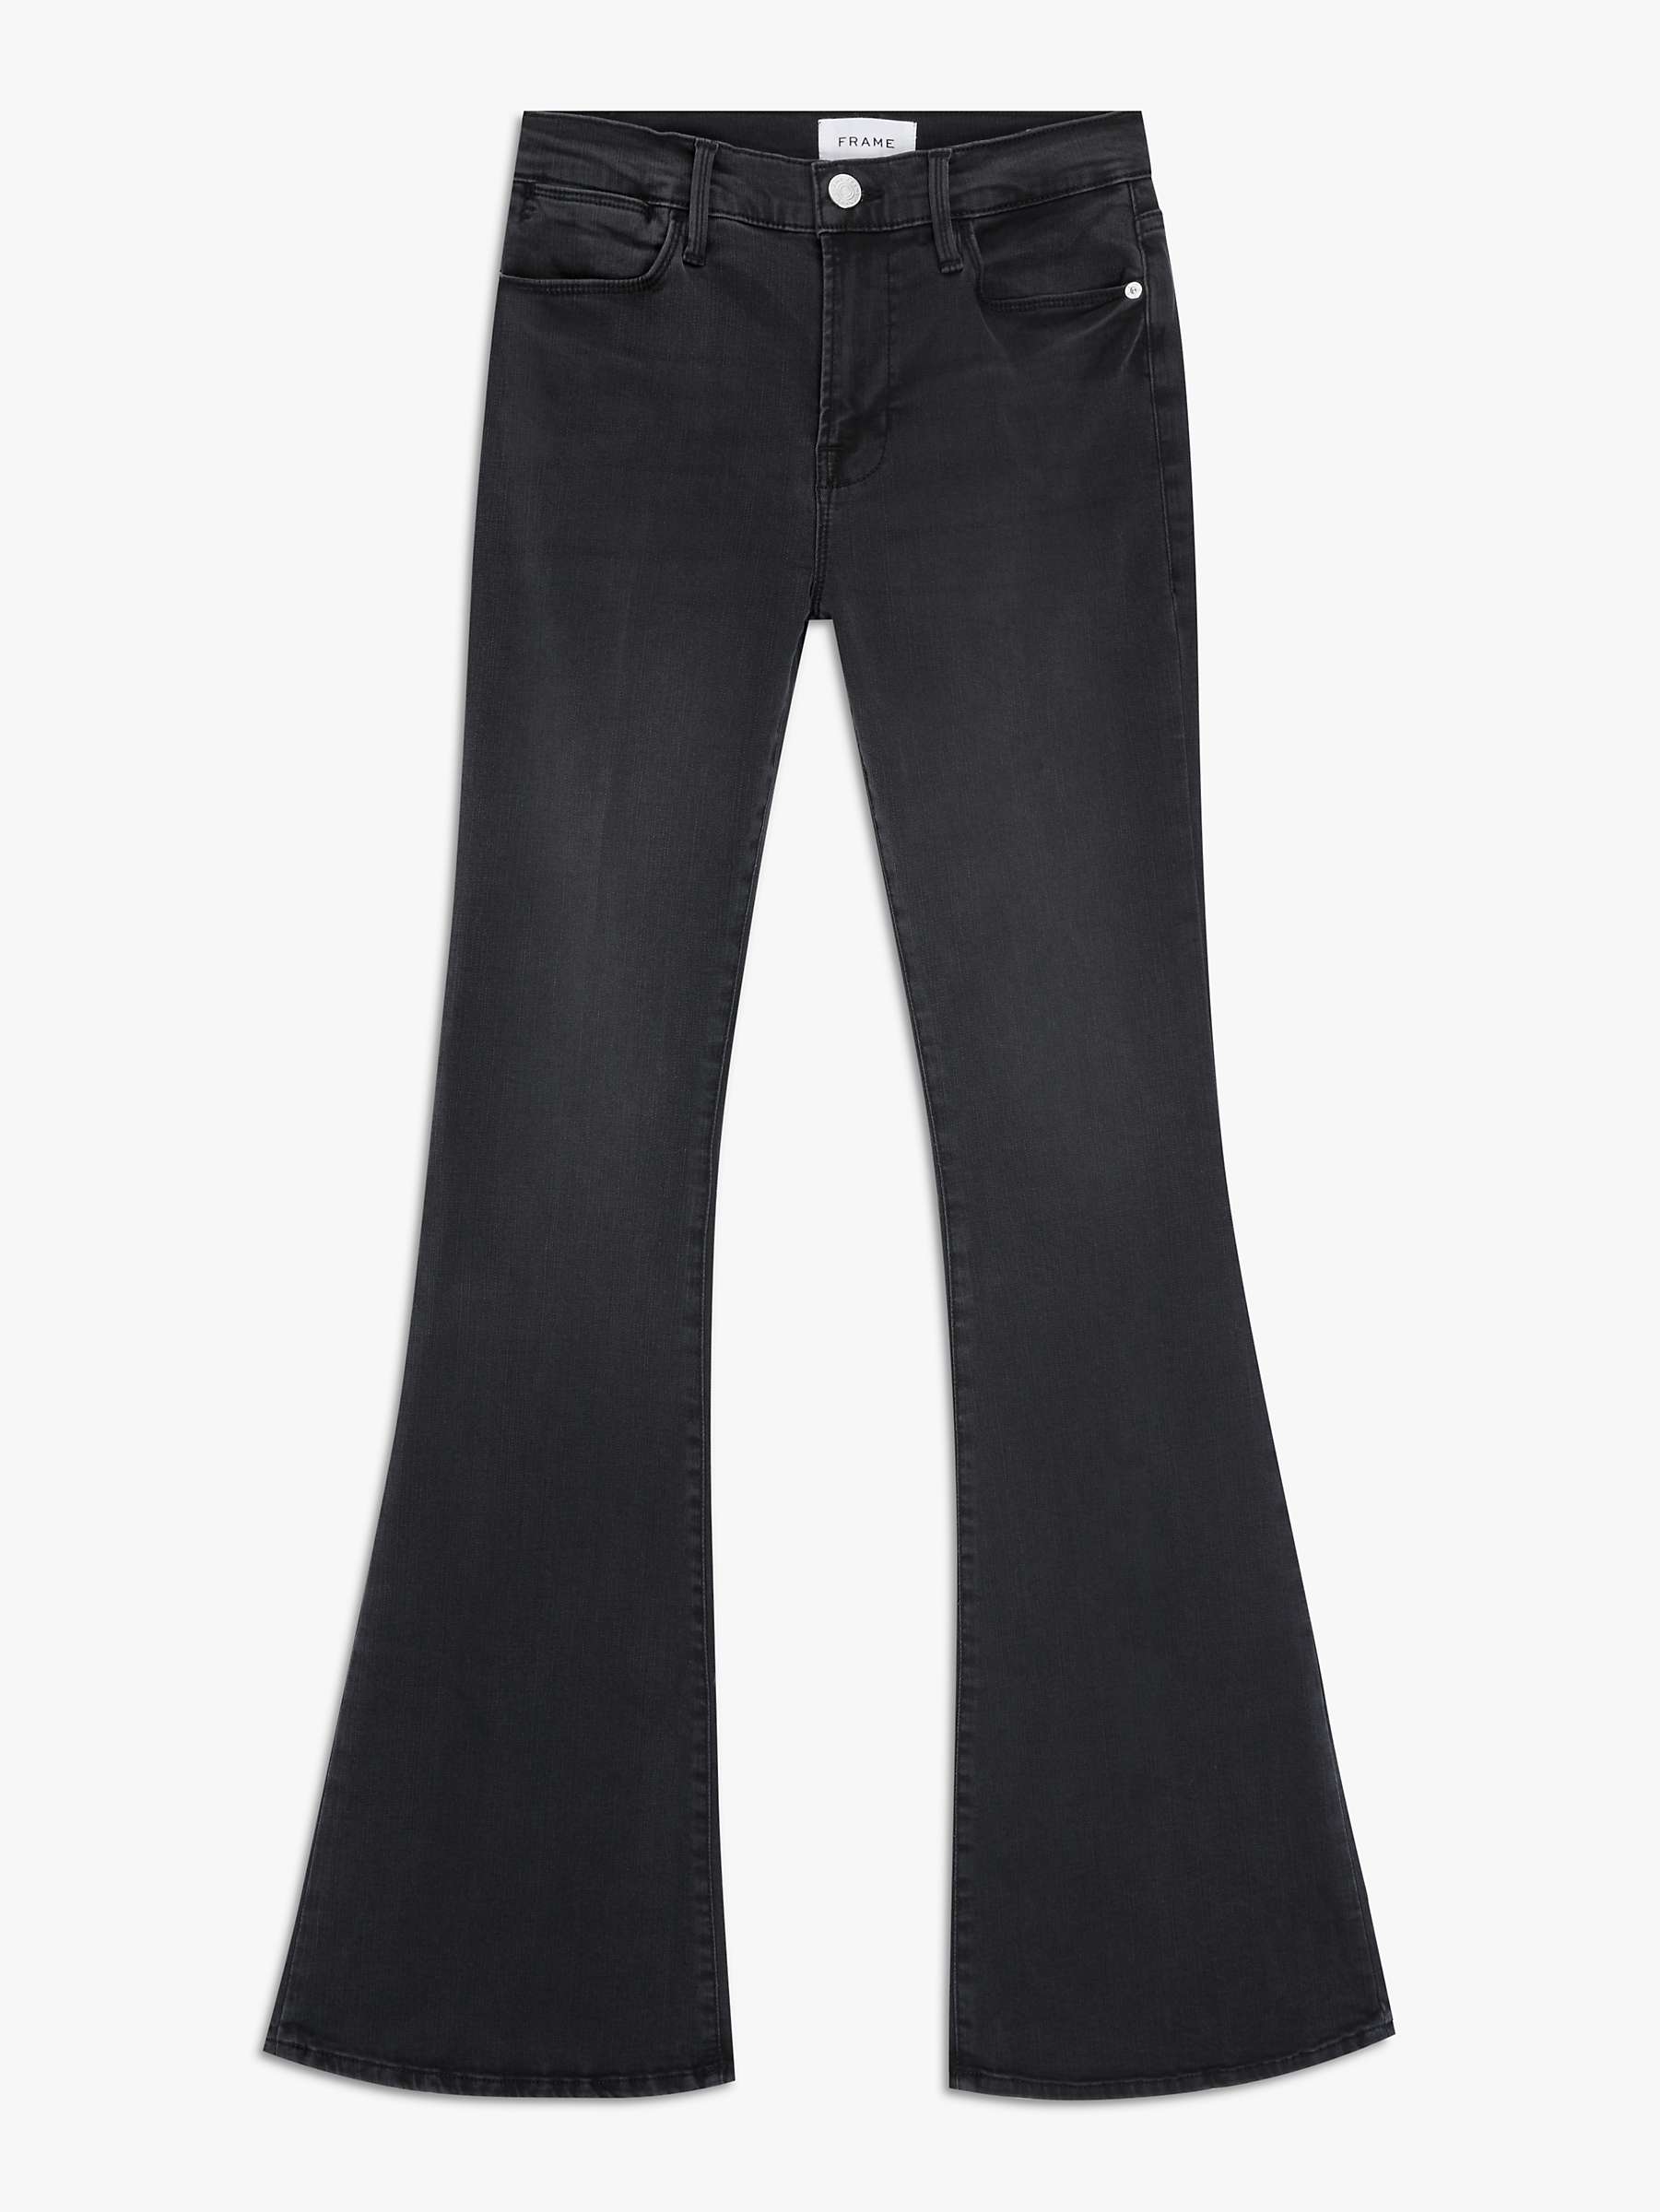 FRAME Le High Flared Jeans, Mardel at John Lewis & Partners